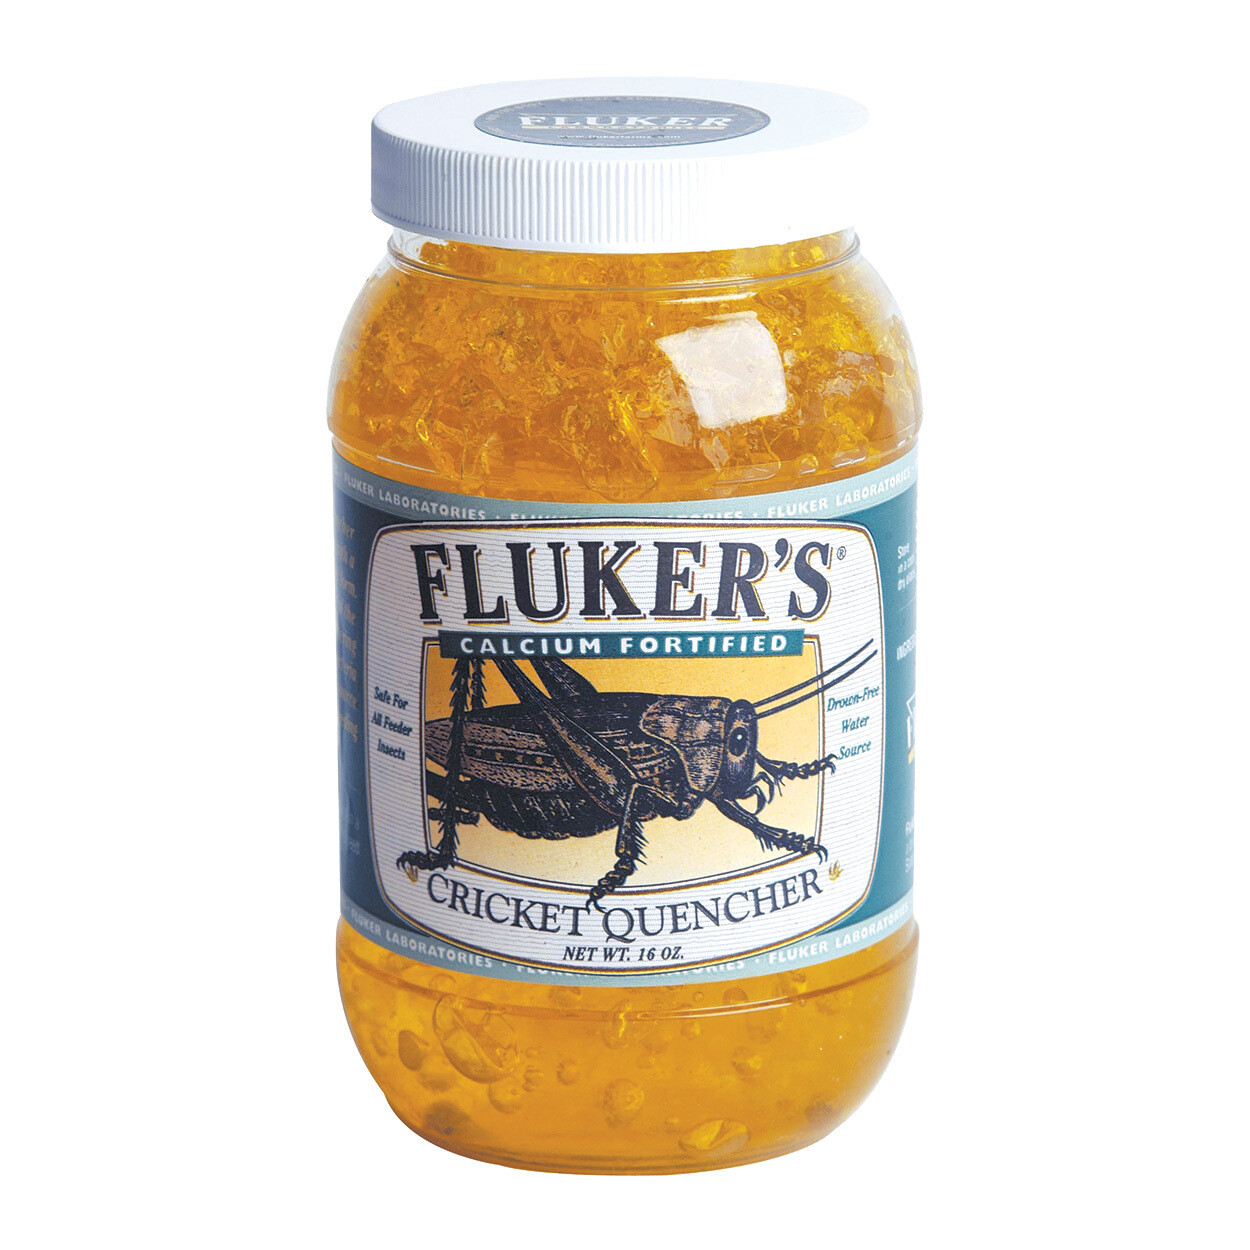 Fluker's Cricket Quencher Calcium Fortified - 454g (16oz)